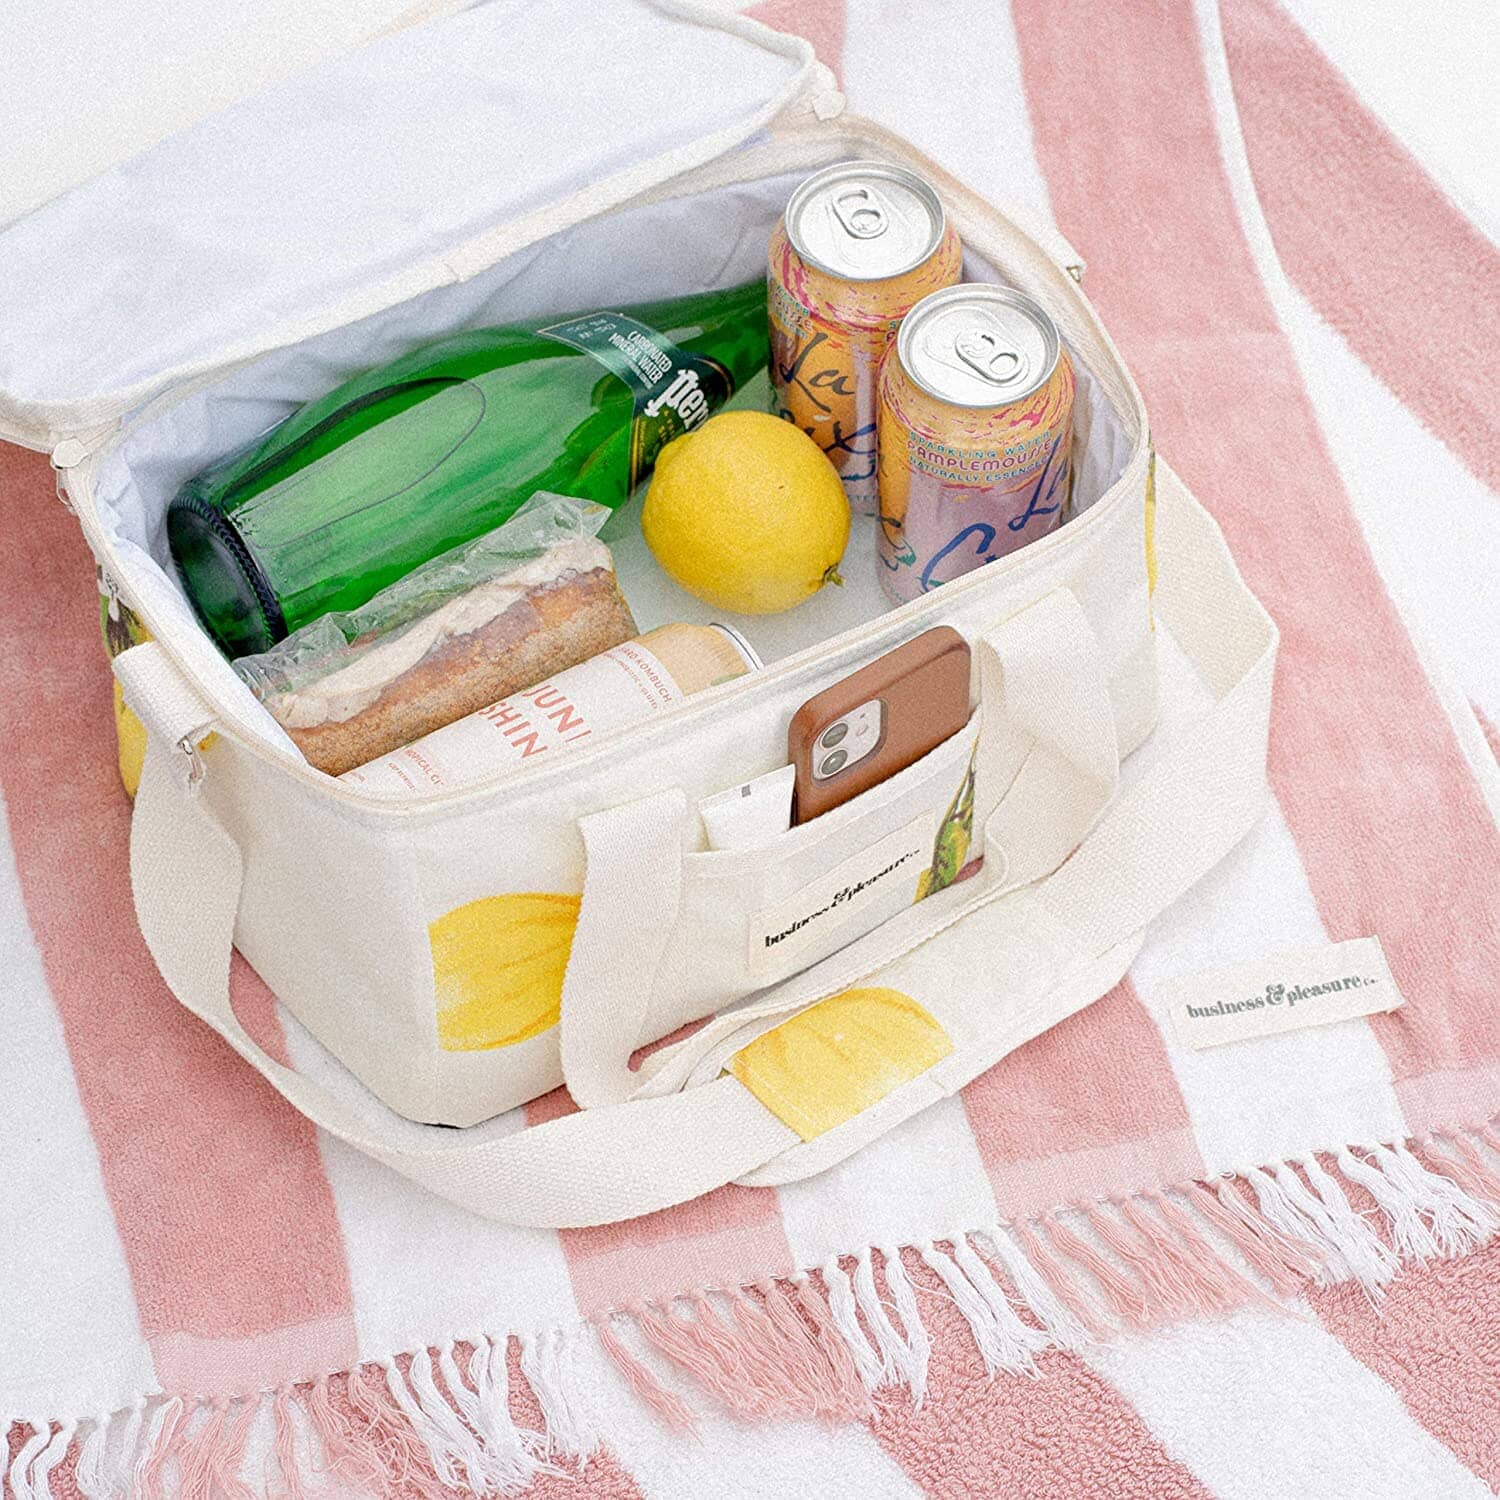 lemons cooler filled with snacks and drinks